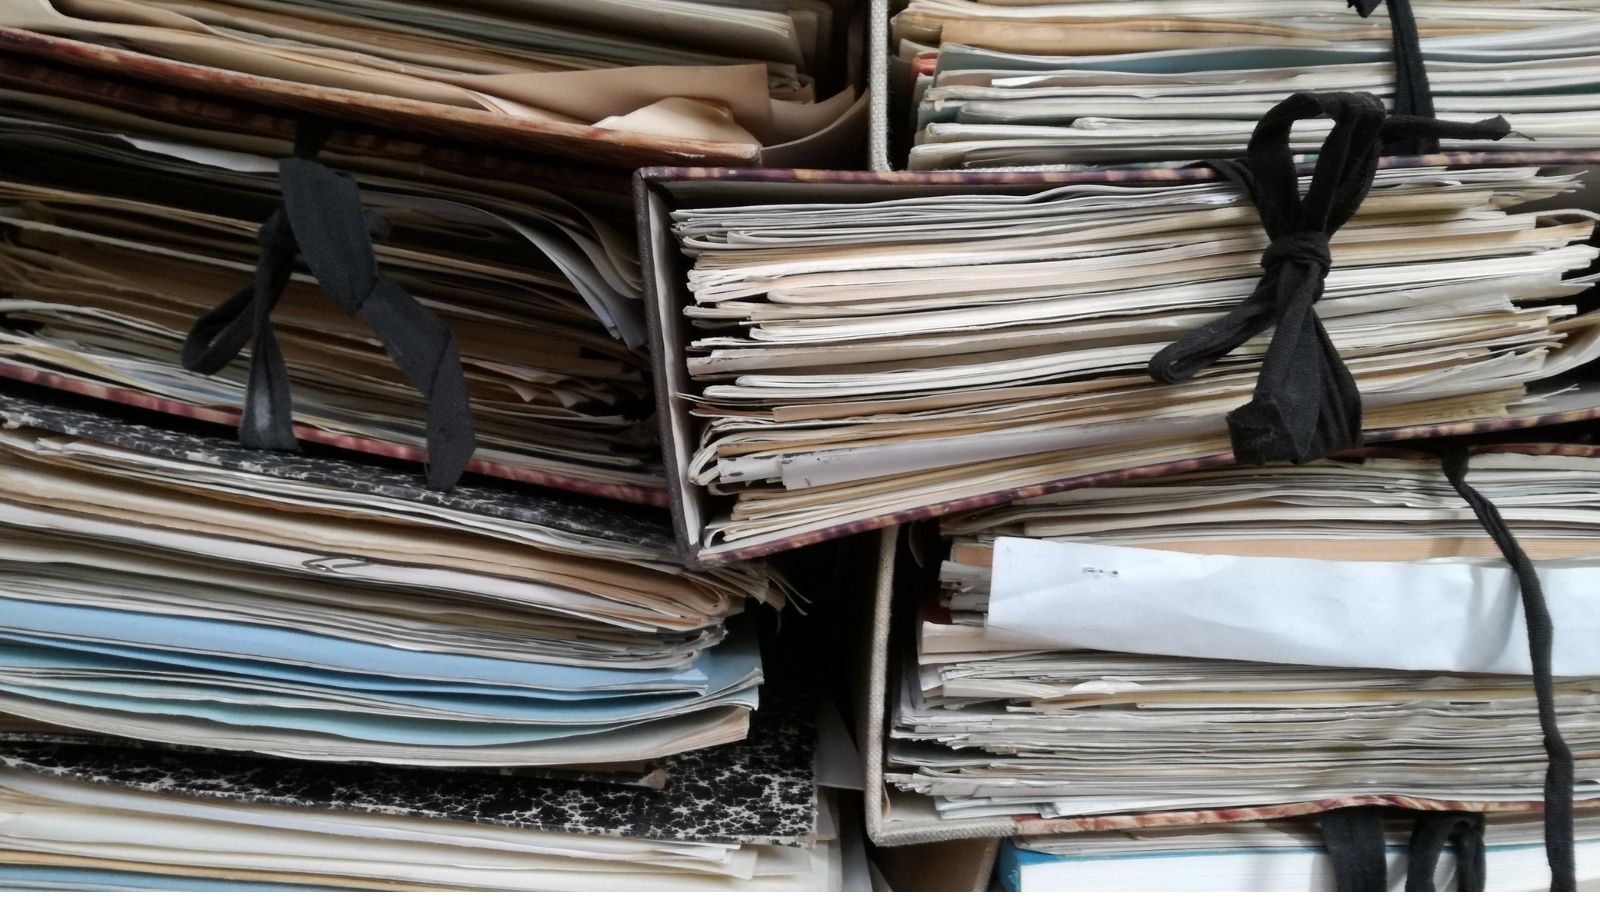 stacks of legal documents in file folders